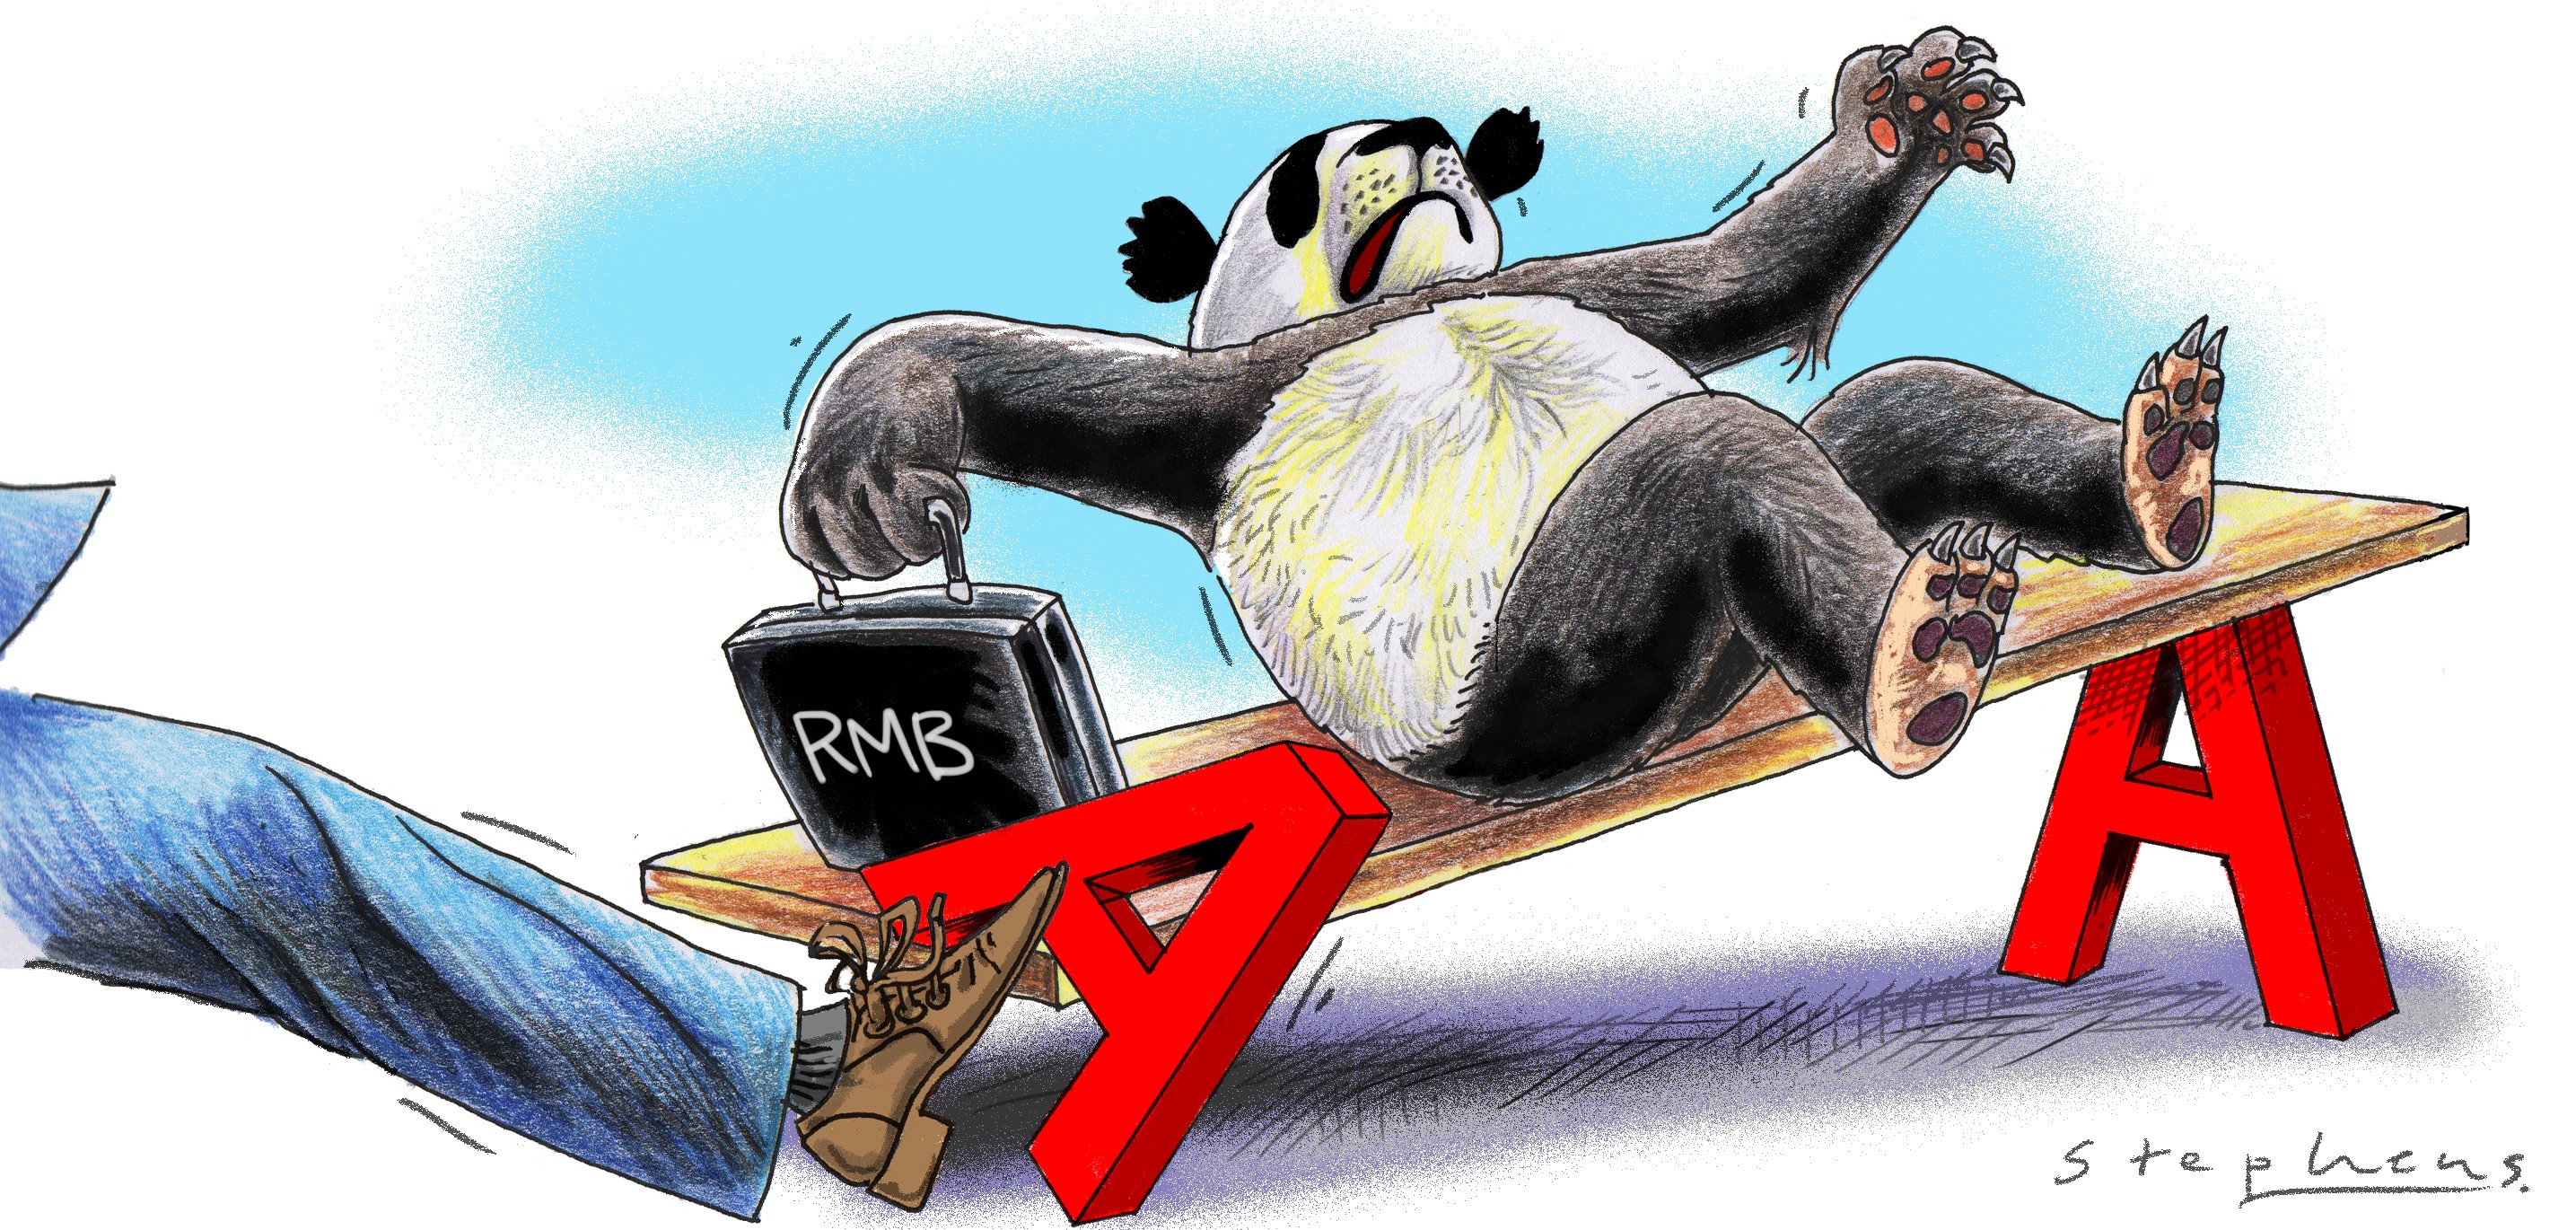 China has been penalised with a lower credit rating, but not the advanced economies, which suffer from secular stagnation and have little hope of reducing their debt. Illustration: Craig Stephens